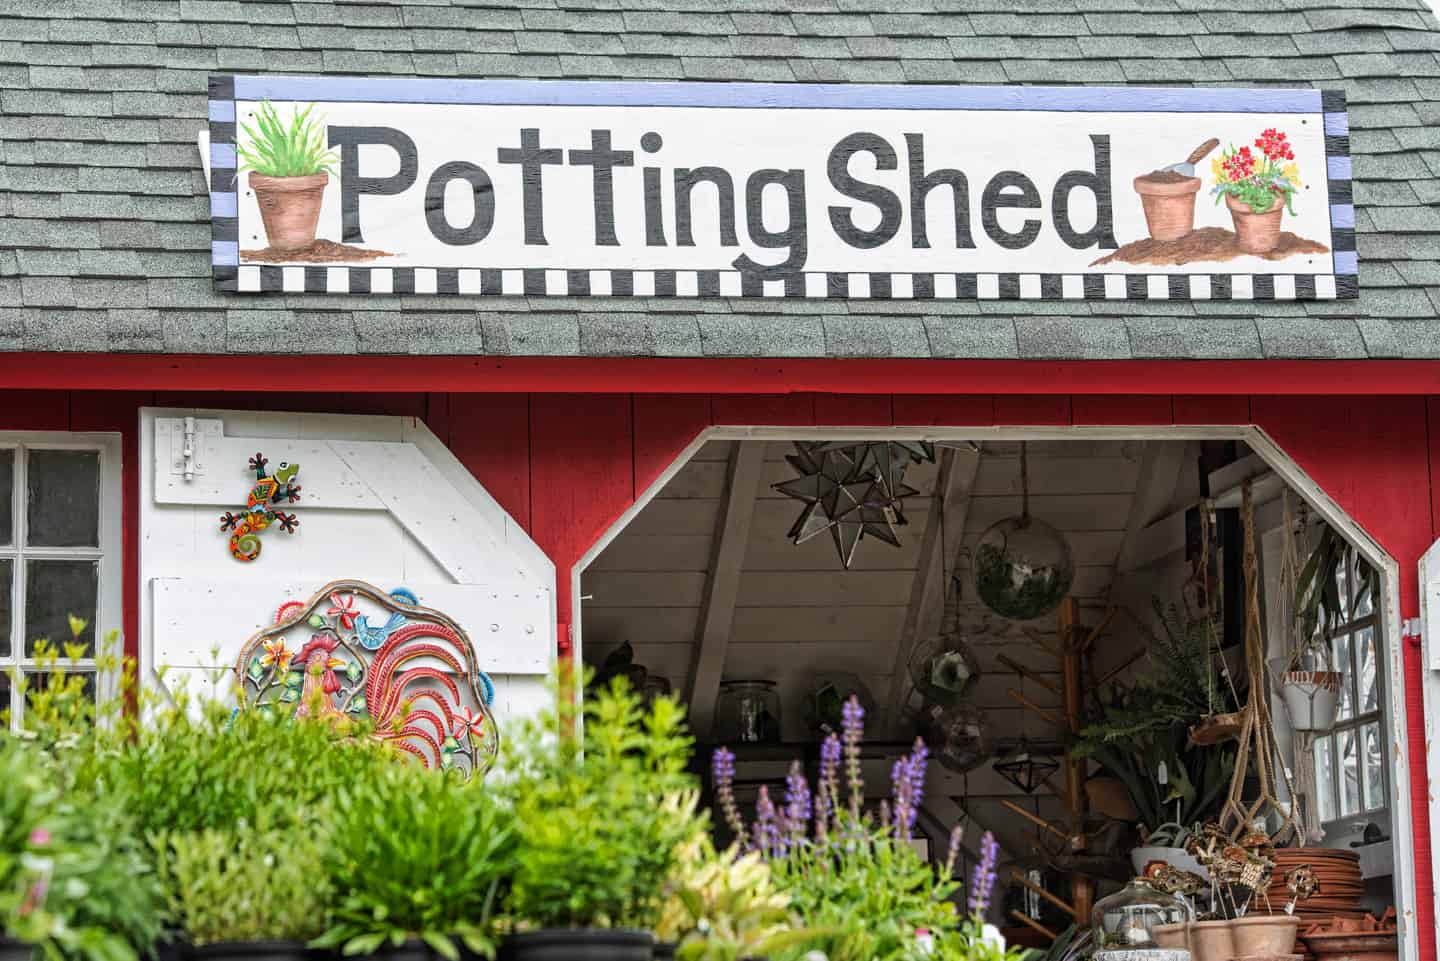 New at Calgo… The Potting Shed!